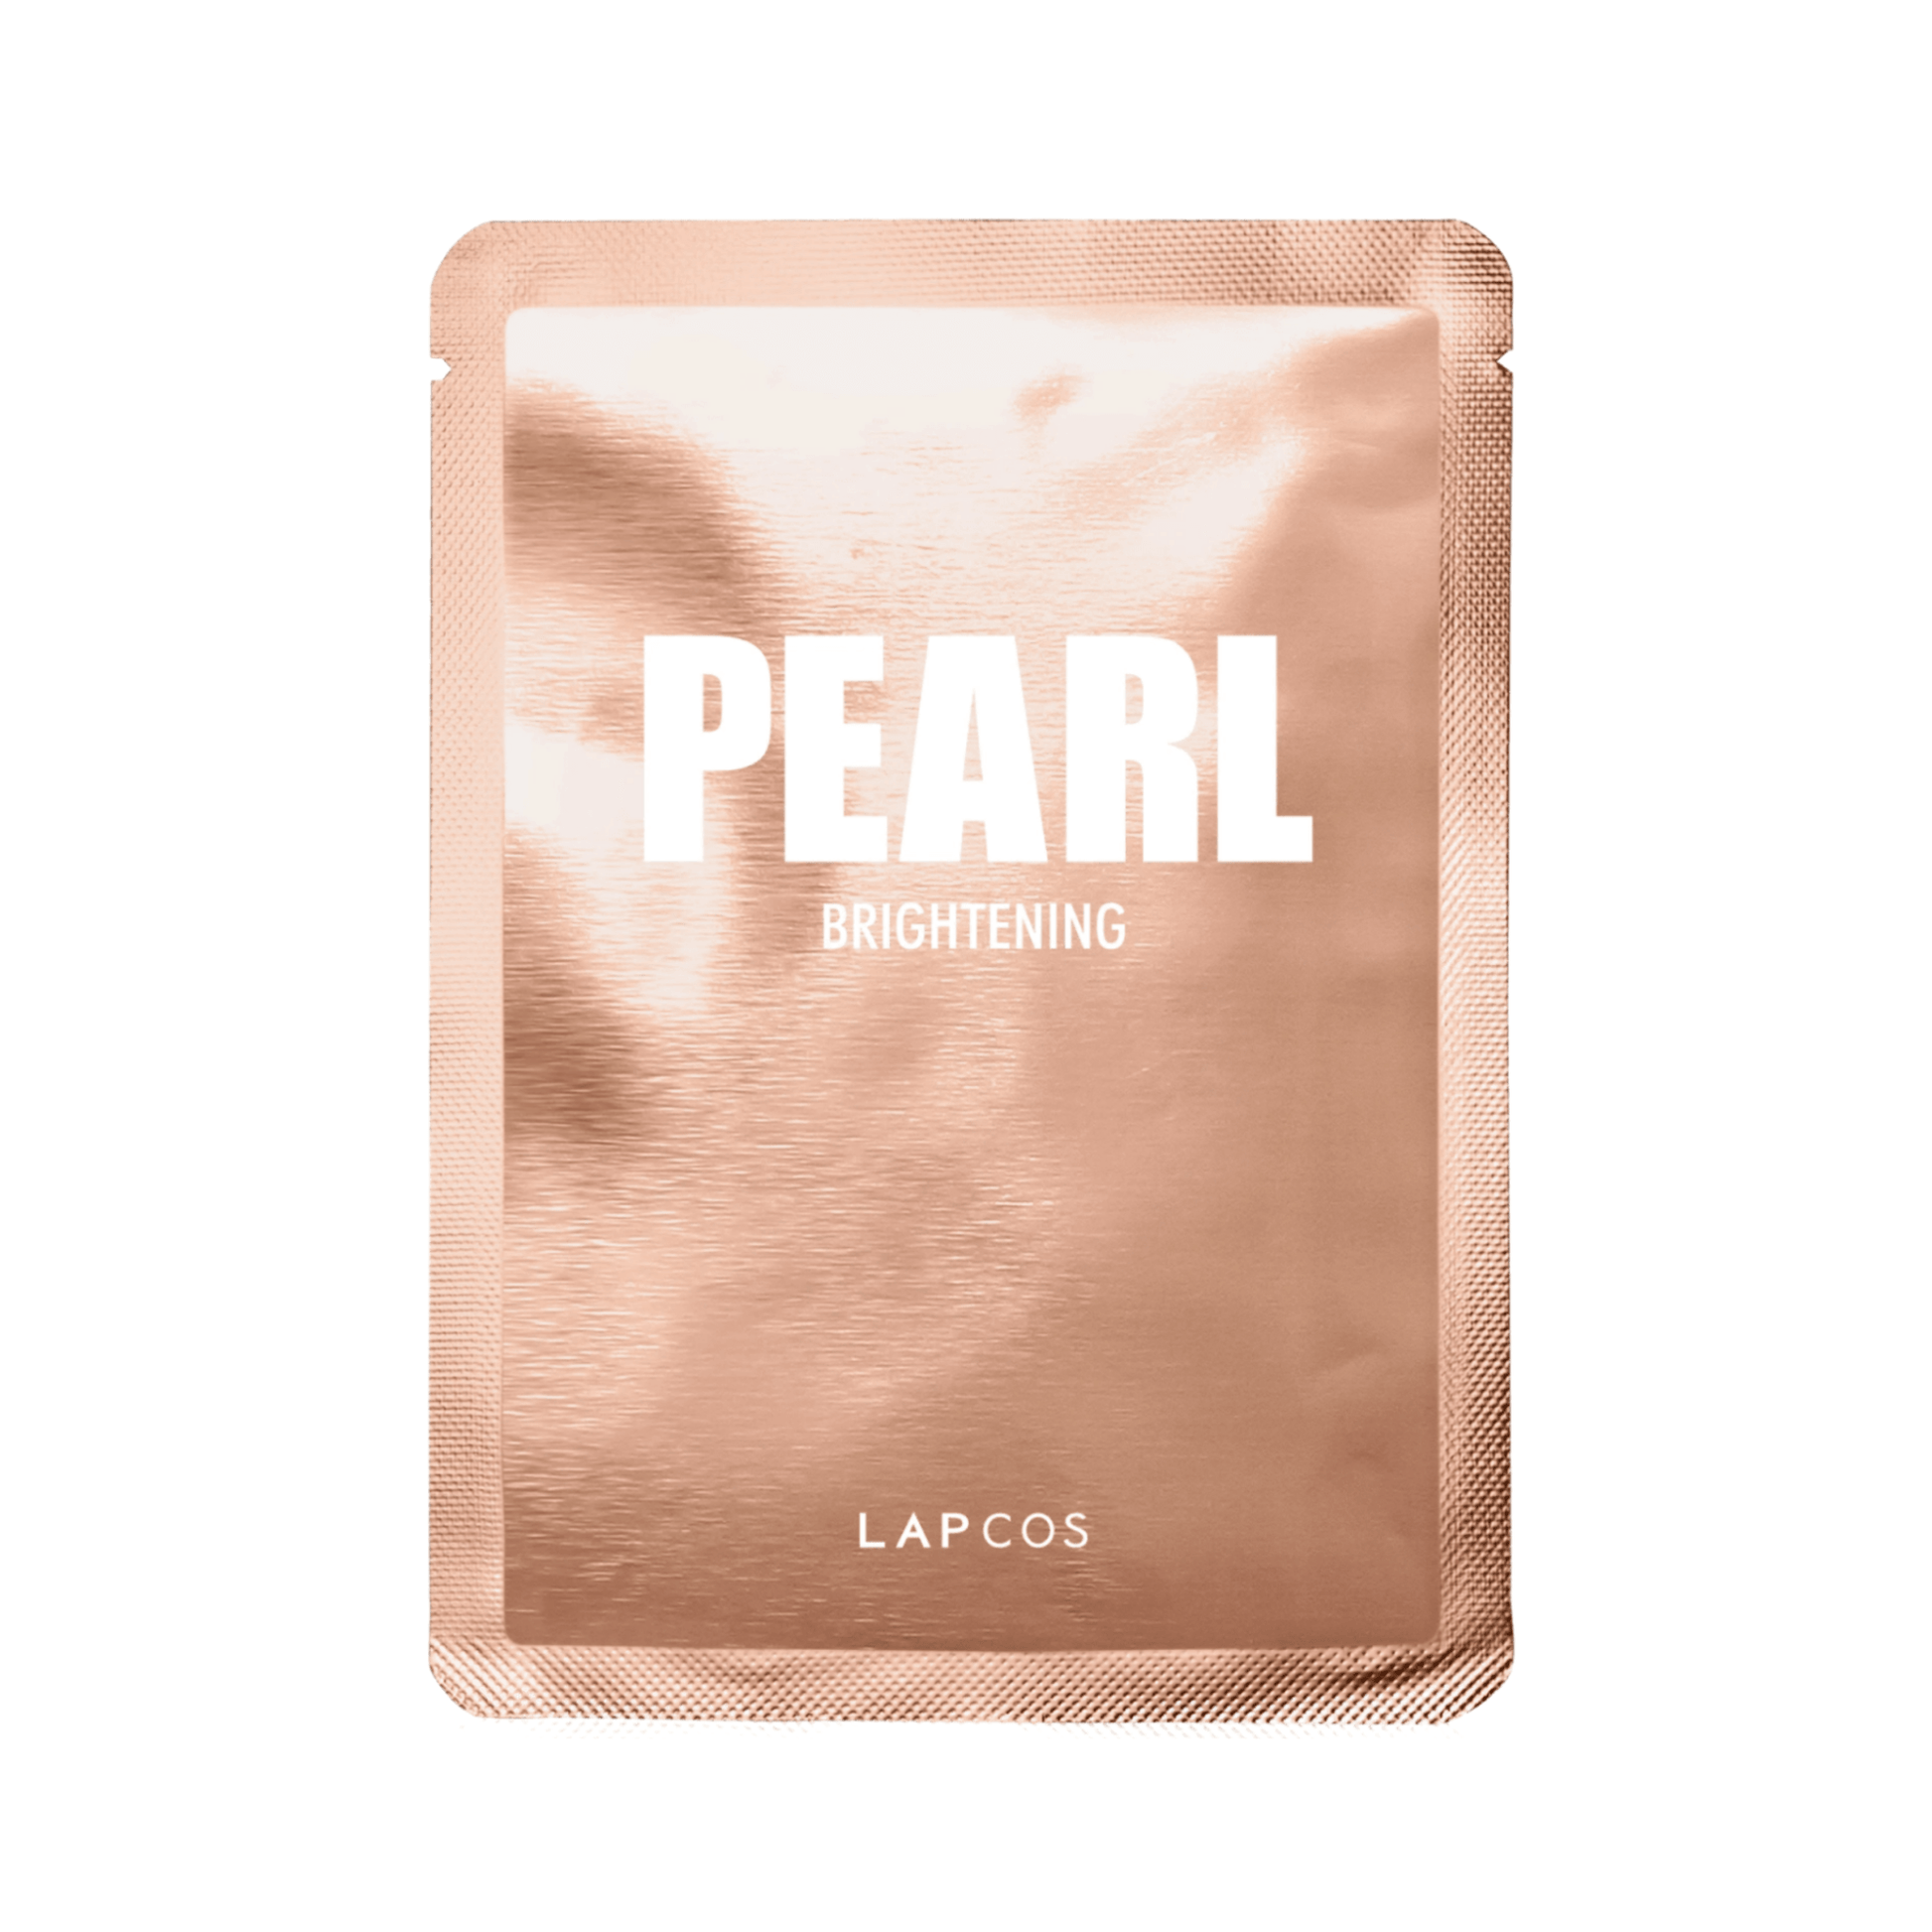 Pearl Sheet Mask - Unboxme